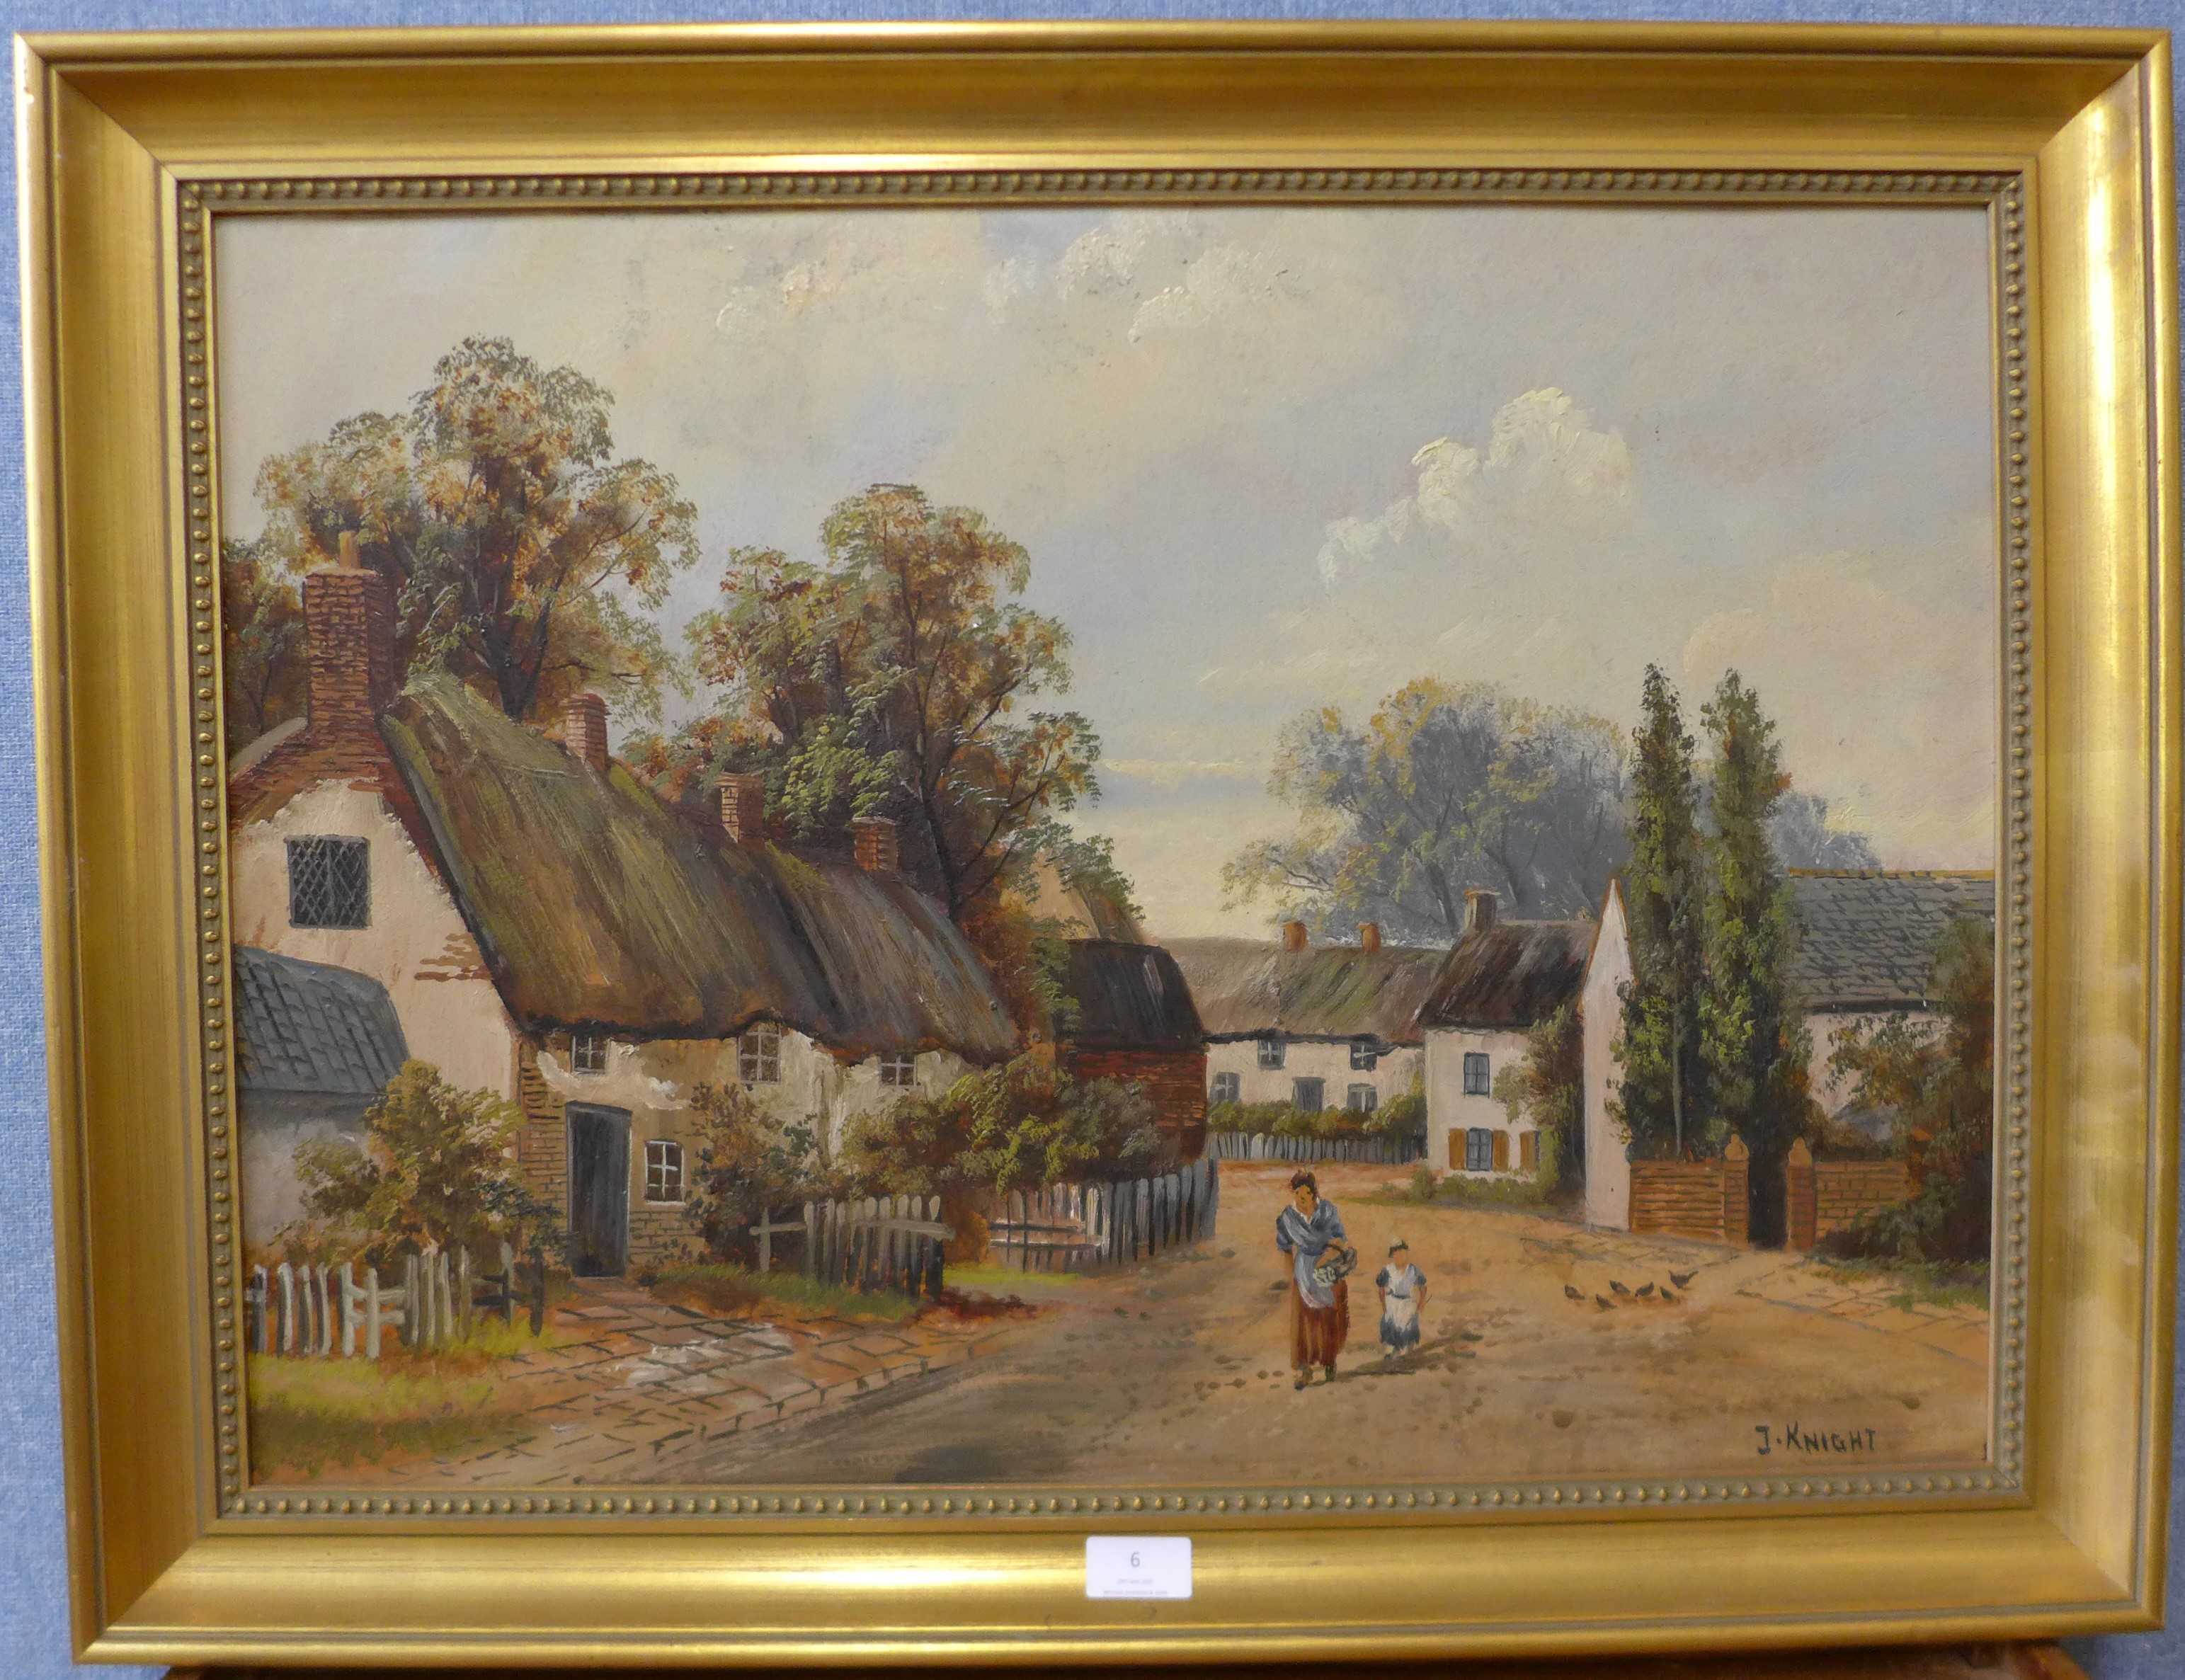 J. Knight, village scene with mother and child on a road, oil on board, 47 x 65cms, framed - Image 2 of 2